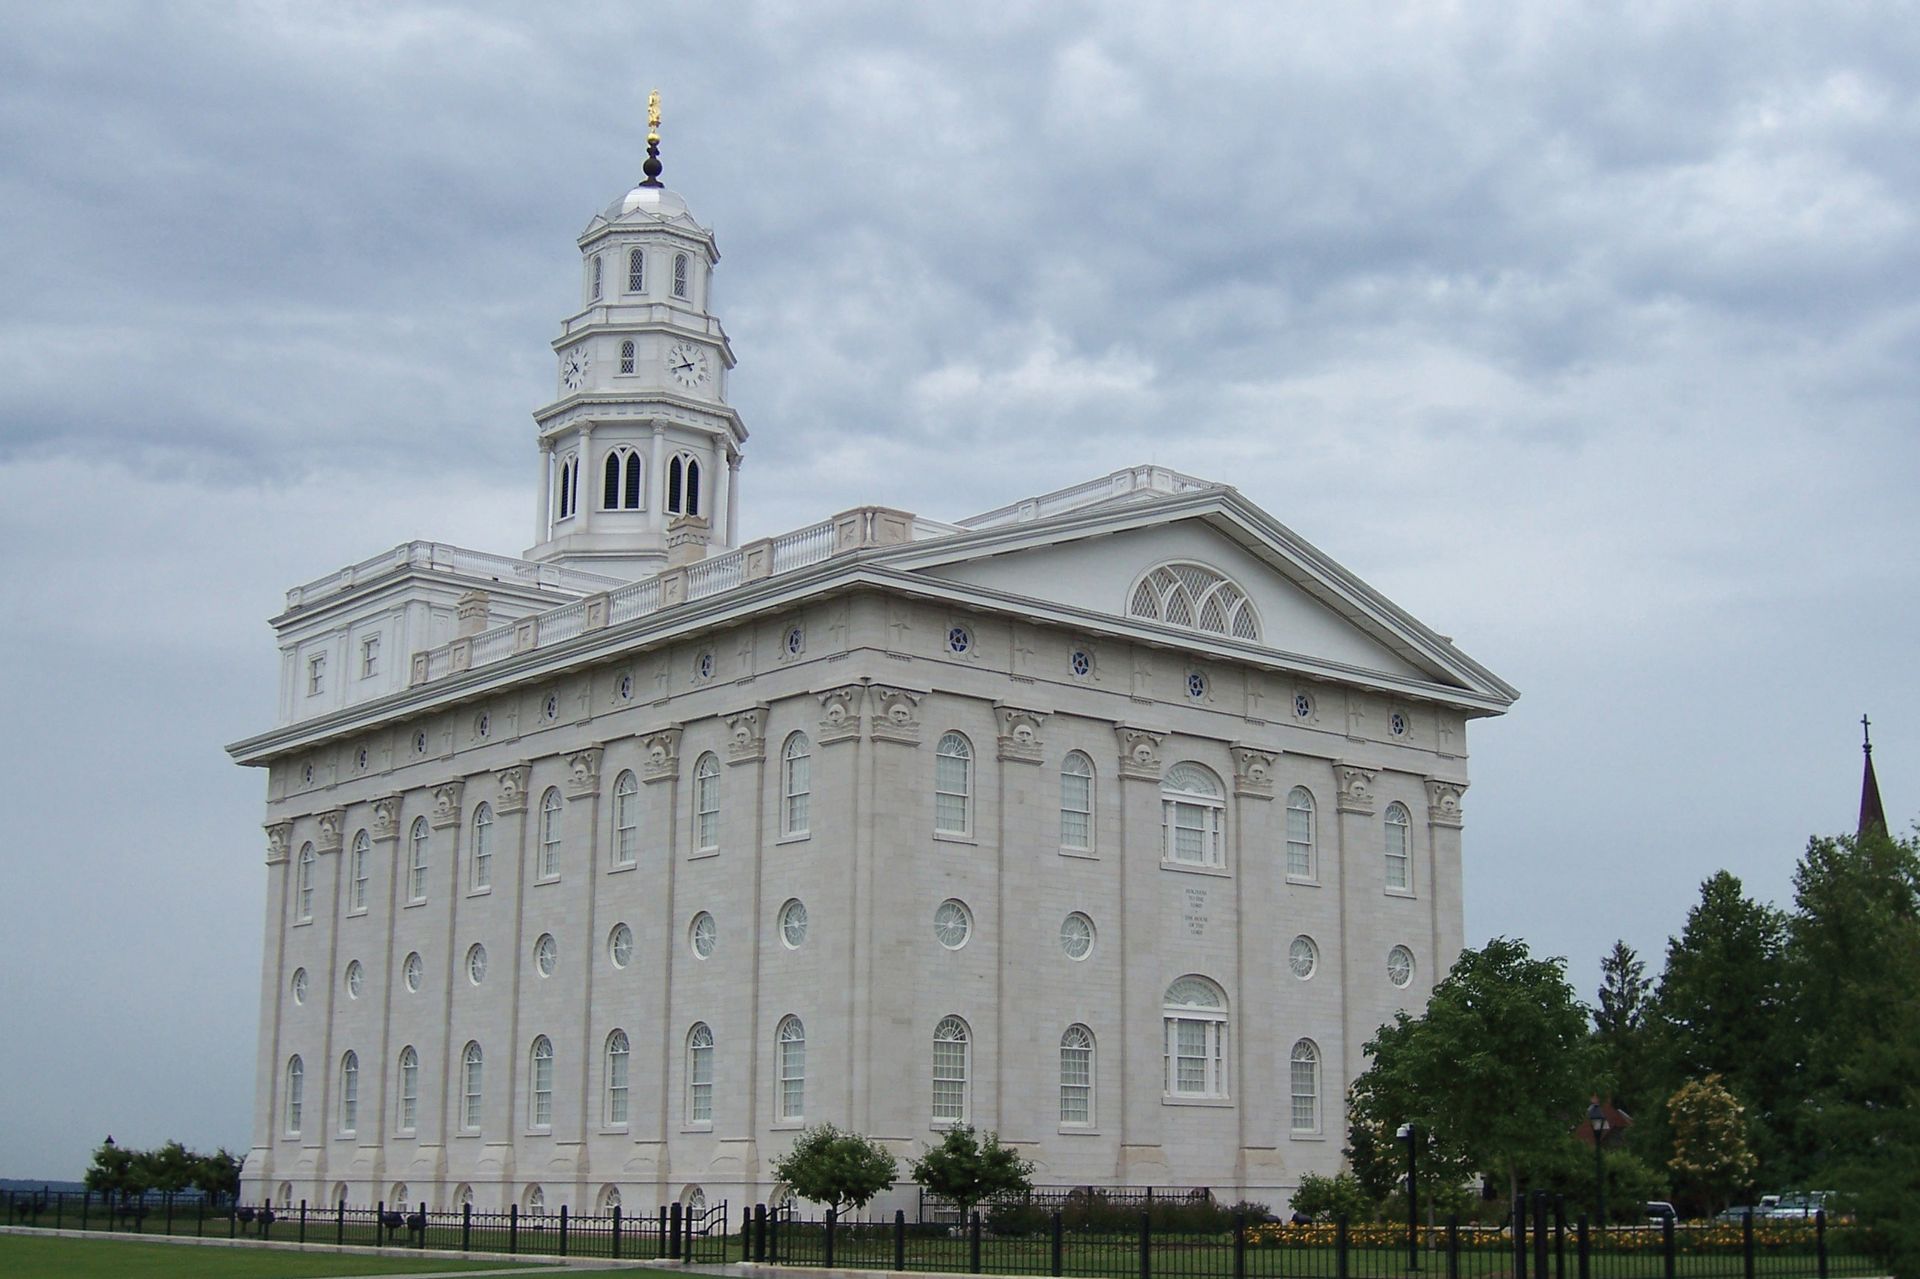 The Nauvoo Illinois Temple back view, including scenery.